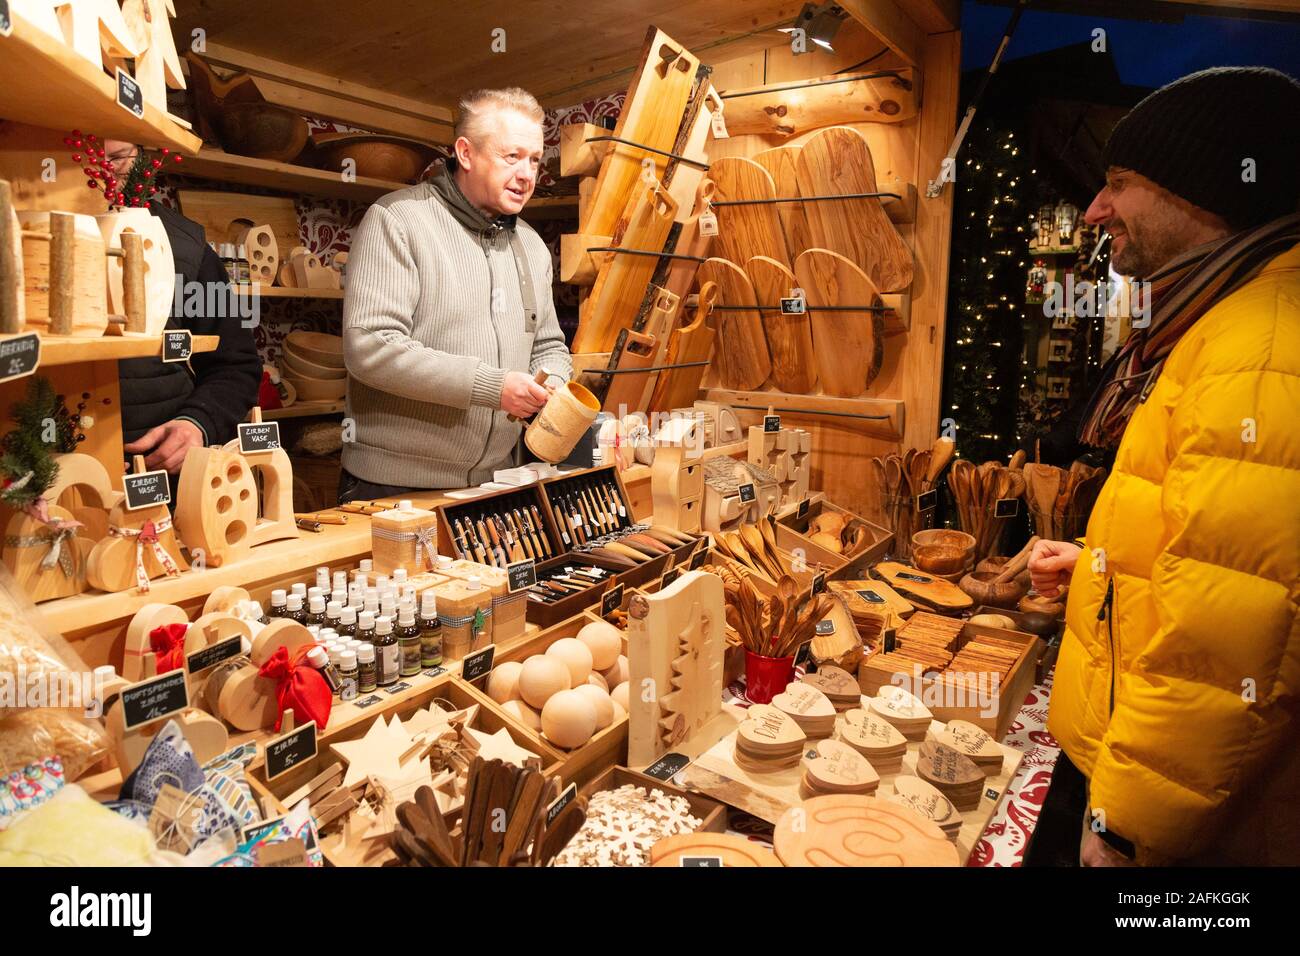 Europe christmas market - a man shopping for wood craft items from a stall, Schonbrunn Palace, Vienna Christmas market, Vienna Austria Europe Stock Photo